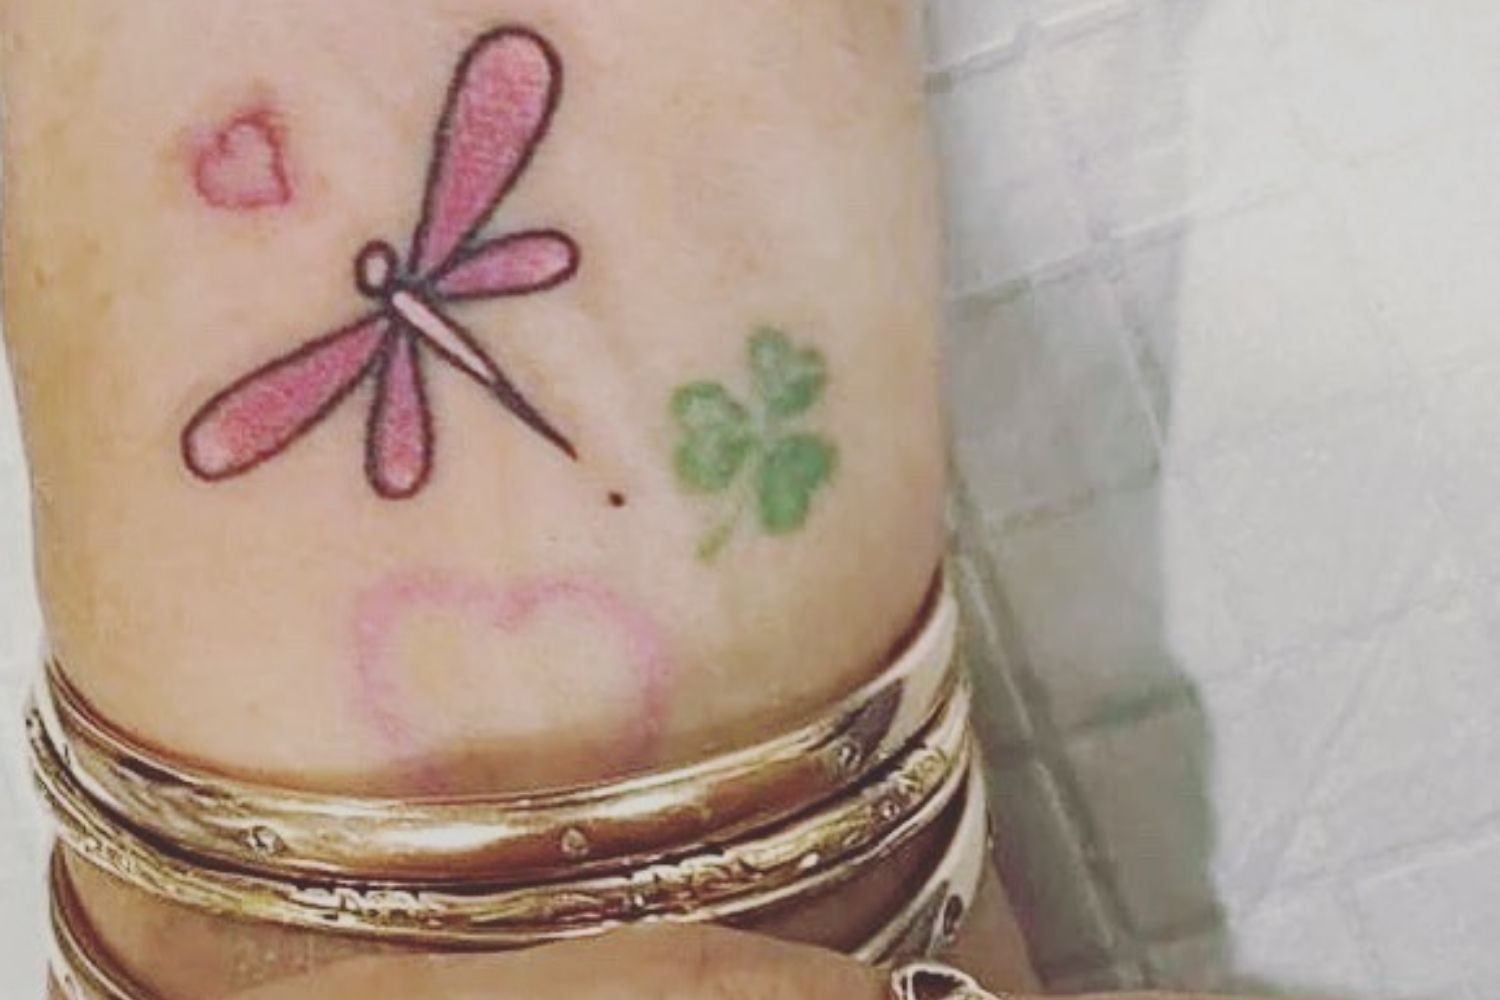 Lisa Curry's new tattoo comes at a time of "change" for the former athlete